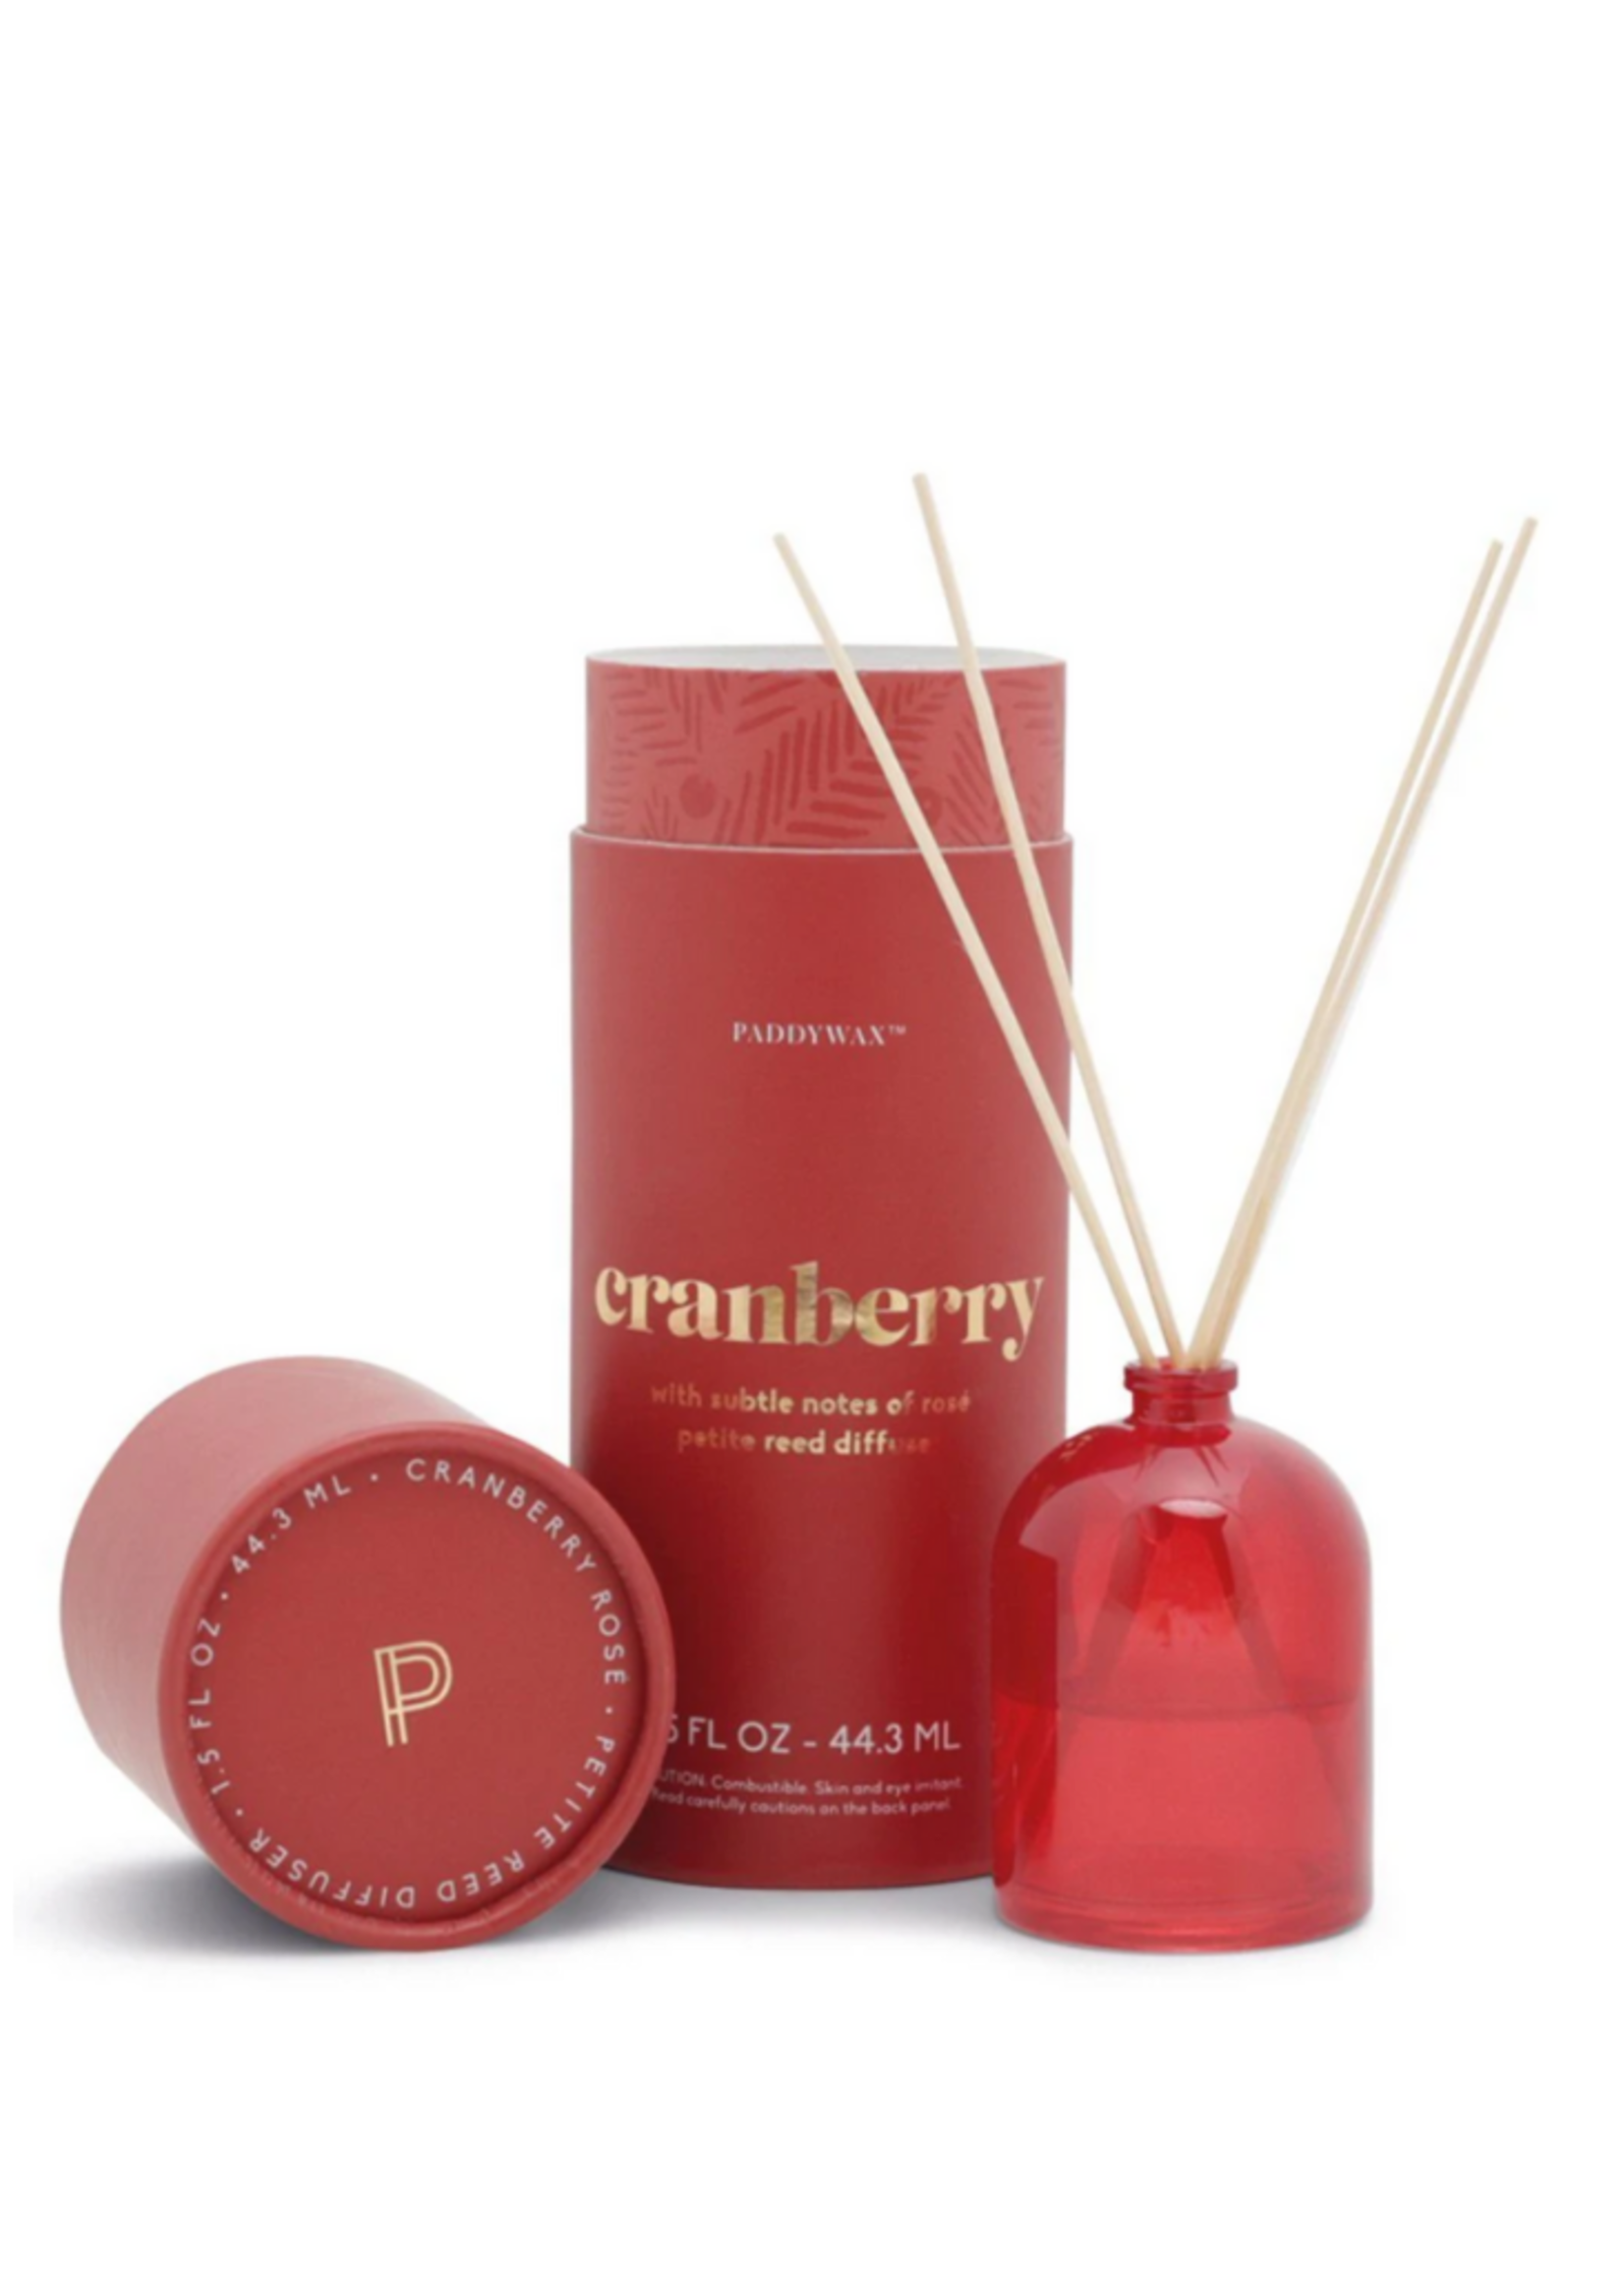 Petite Reed Diffuser // Cranberry